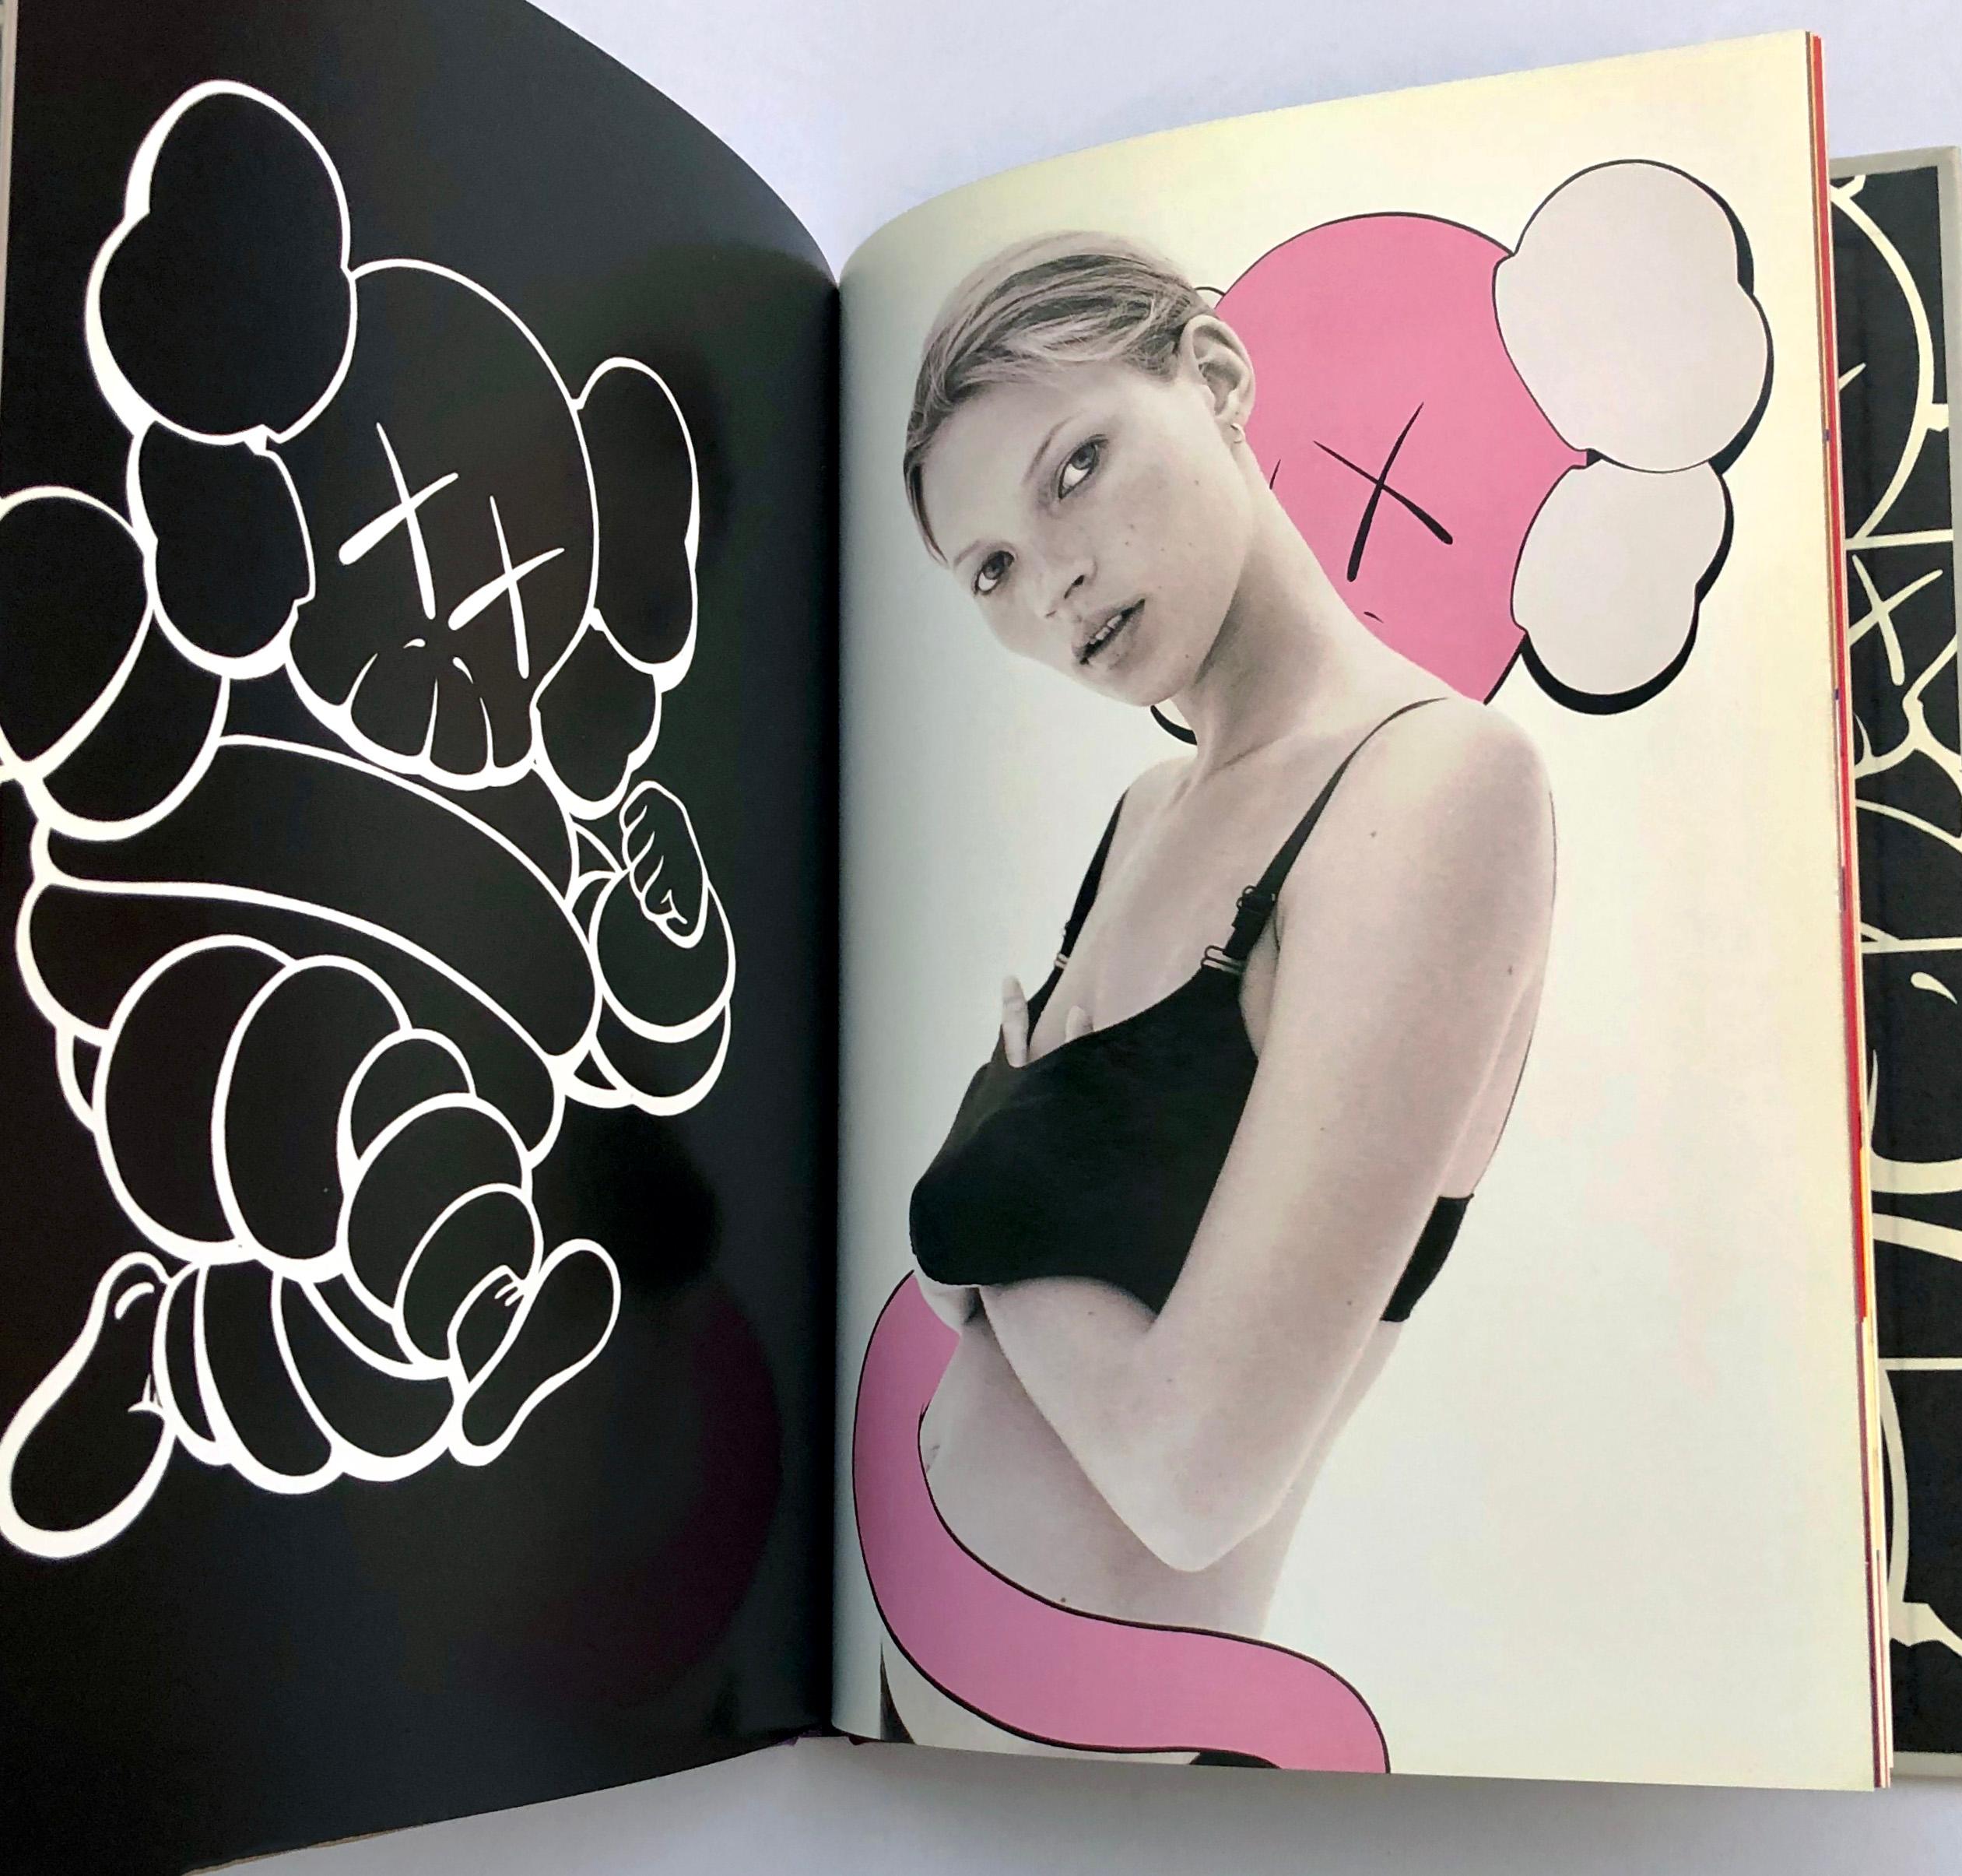 KAWS One: KAWS Artist Monograph, 1st edition, 2001
Hardcover book, 80 pages
Rare and out of print. A definitive look back at the development of the artist's style and early beginnings. 

8.4 x 6.3 x 0.5 inches
Condition: Extremely minor shelf wear;